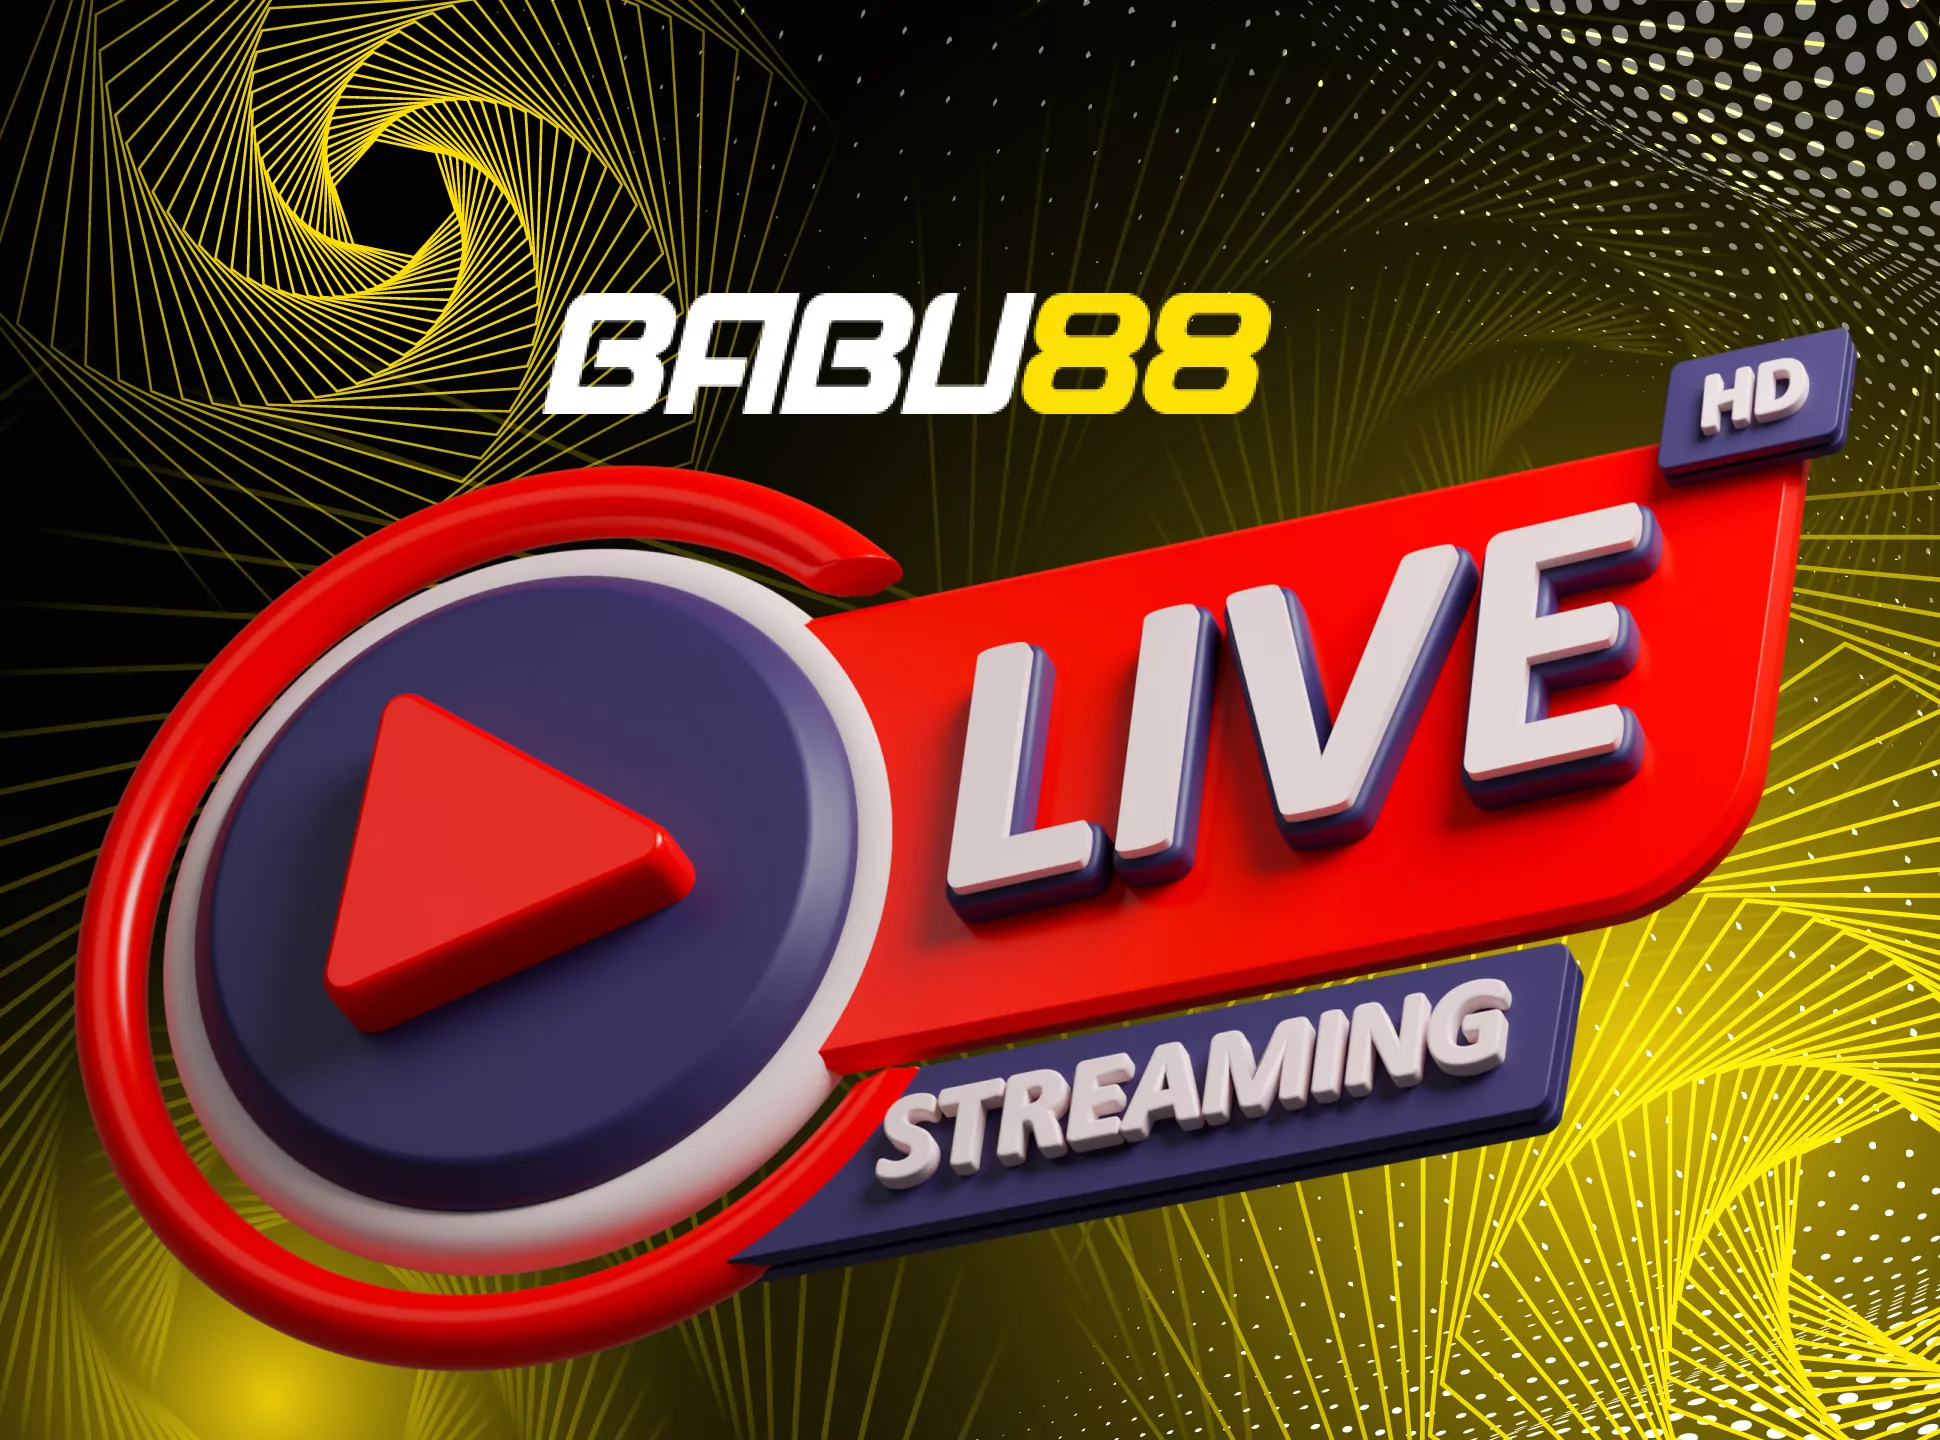 You can watch the broadcasts of the matches and plave bets in the Babu88 app.